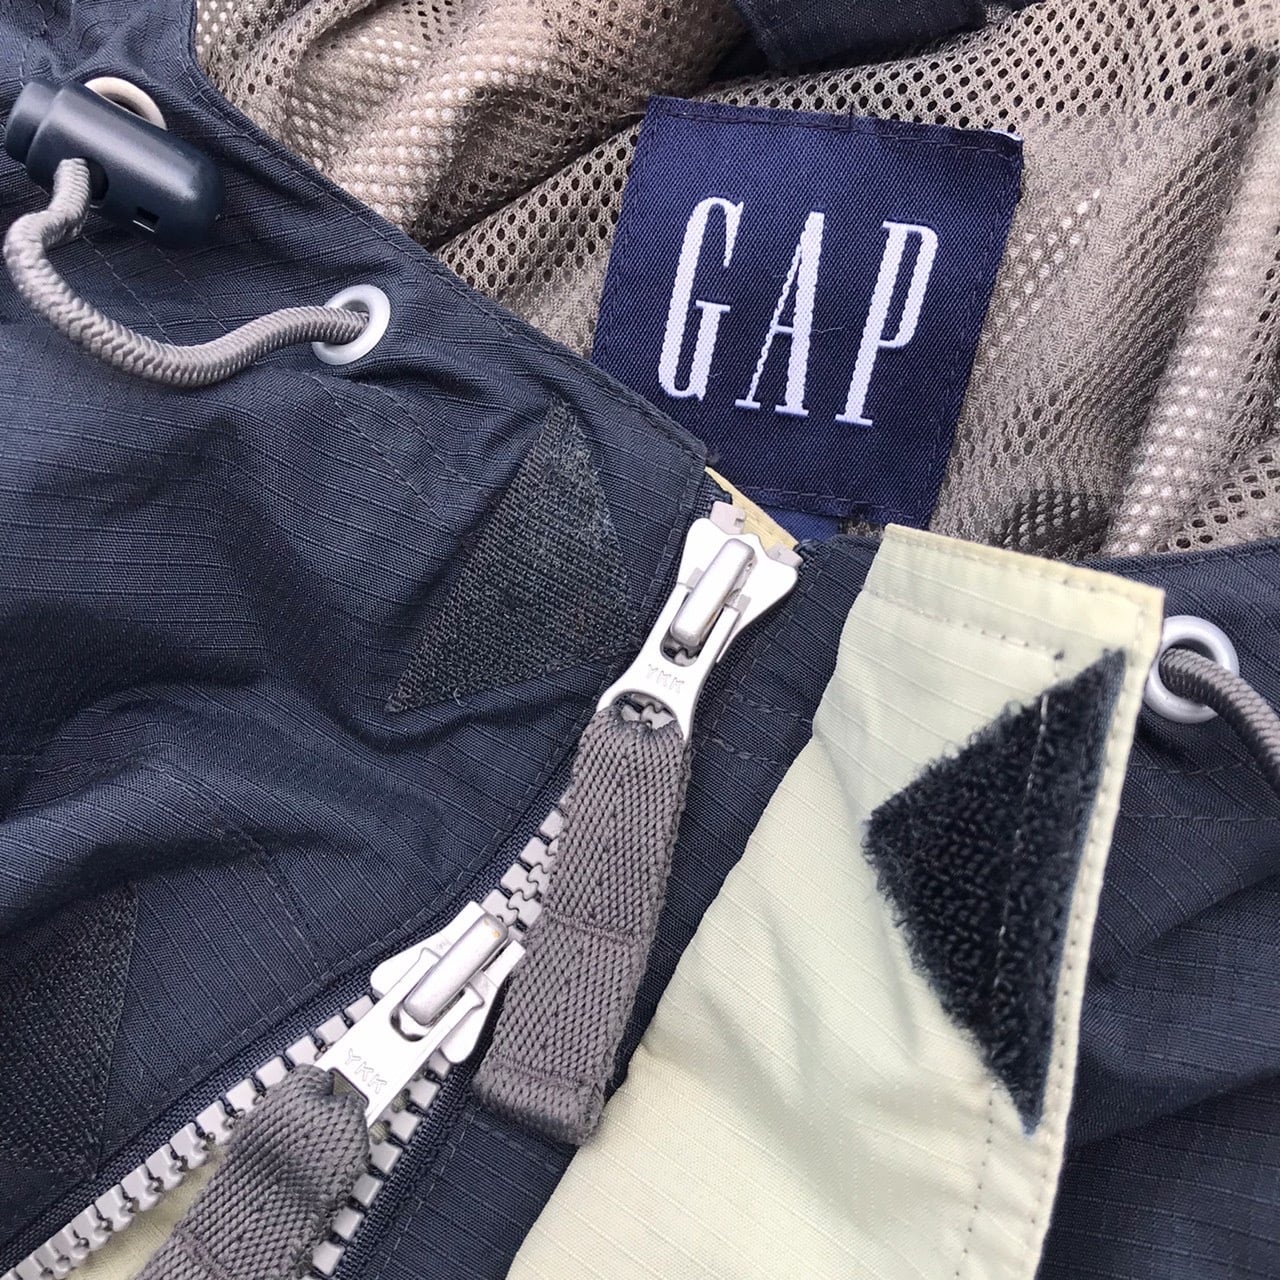 00's OLD GAP ナイロンフーデッドジャケット | 古着屋NEVERMIND